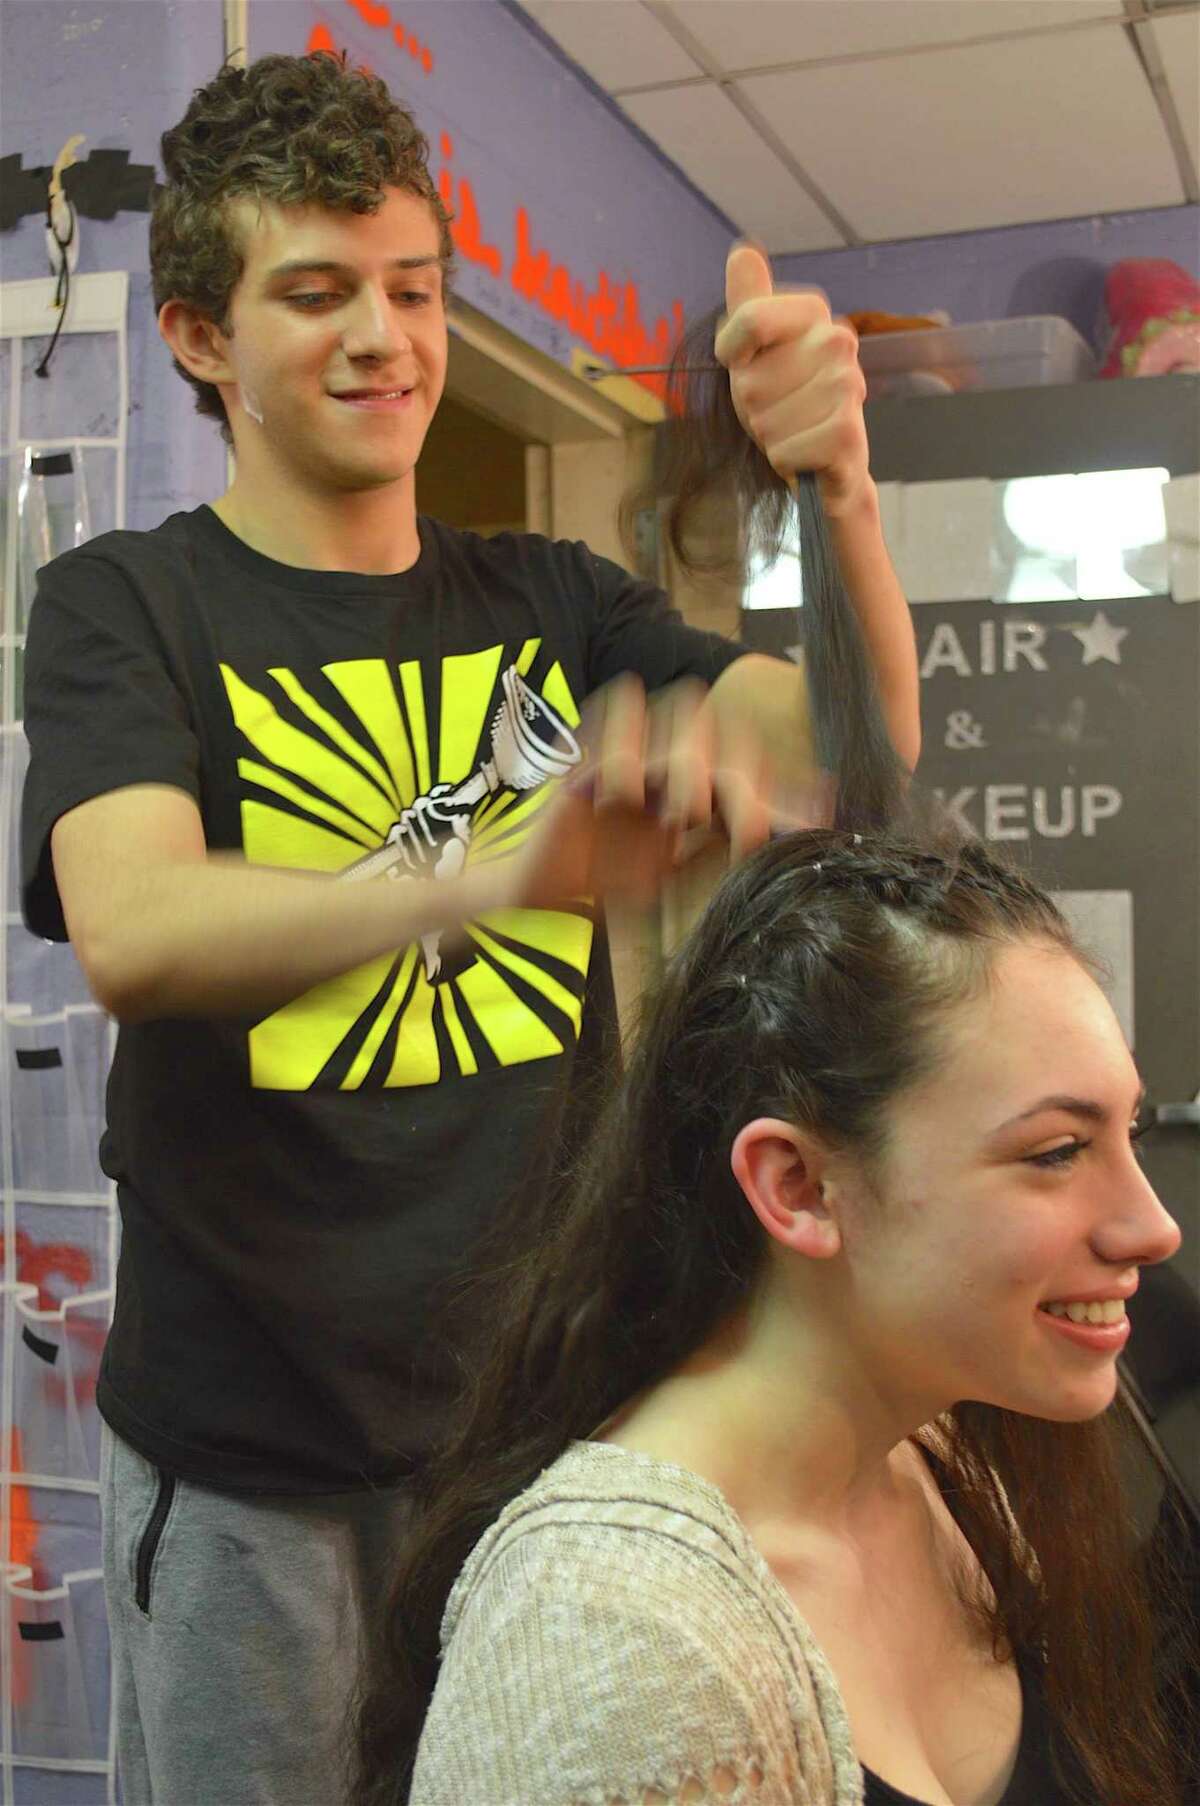 Sophia Sherman, 16, has her hair done by Antonio Antonelli, 15, in preparation for the Staples High School Players' performance of "Urinetown, the Musical," Friday, March 17, 2017, in Westport, Conn. The Staples High School Players’ spring production of “Urinetown, the Musical” got under way last weekend, and continues this Friday. Cast and crew assembled early in the afternoon to prepare for the show — donning wigs, applying makeup, and making last-minute adjustments to the set. The 2001 musical, which parodies other musicals and a range of social institutions, runs Friday and Saturday, March 24 and 25. For more information visit www.staplesplayers.com.